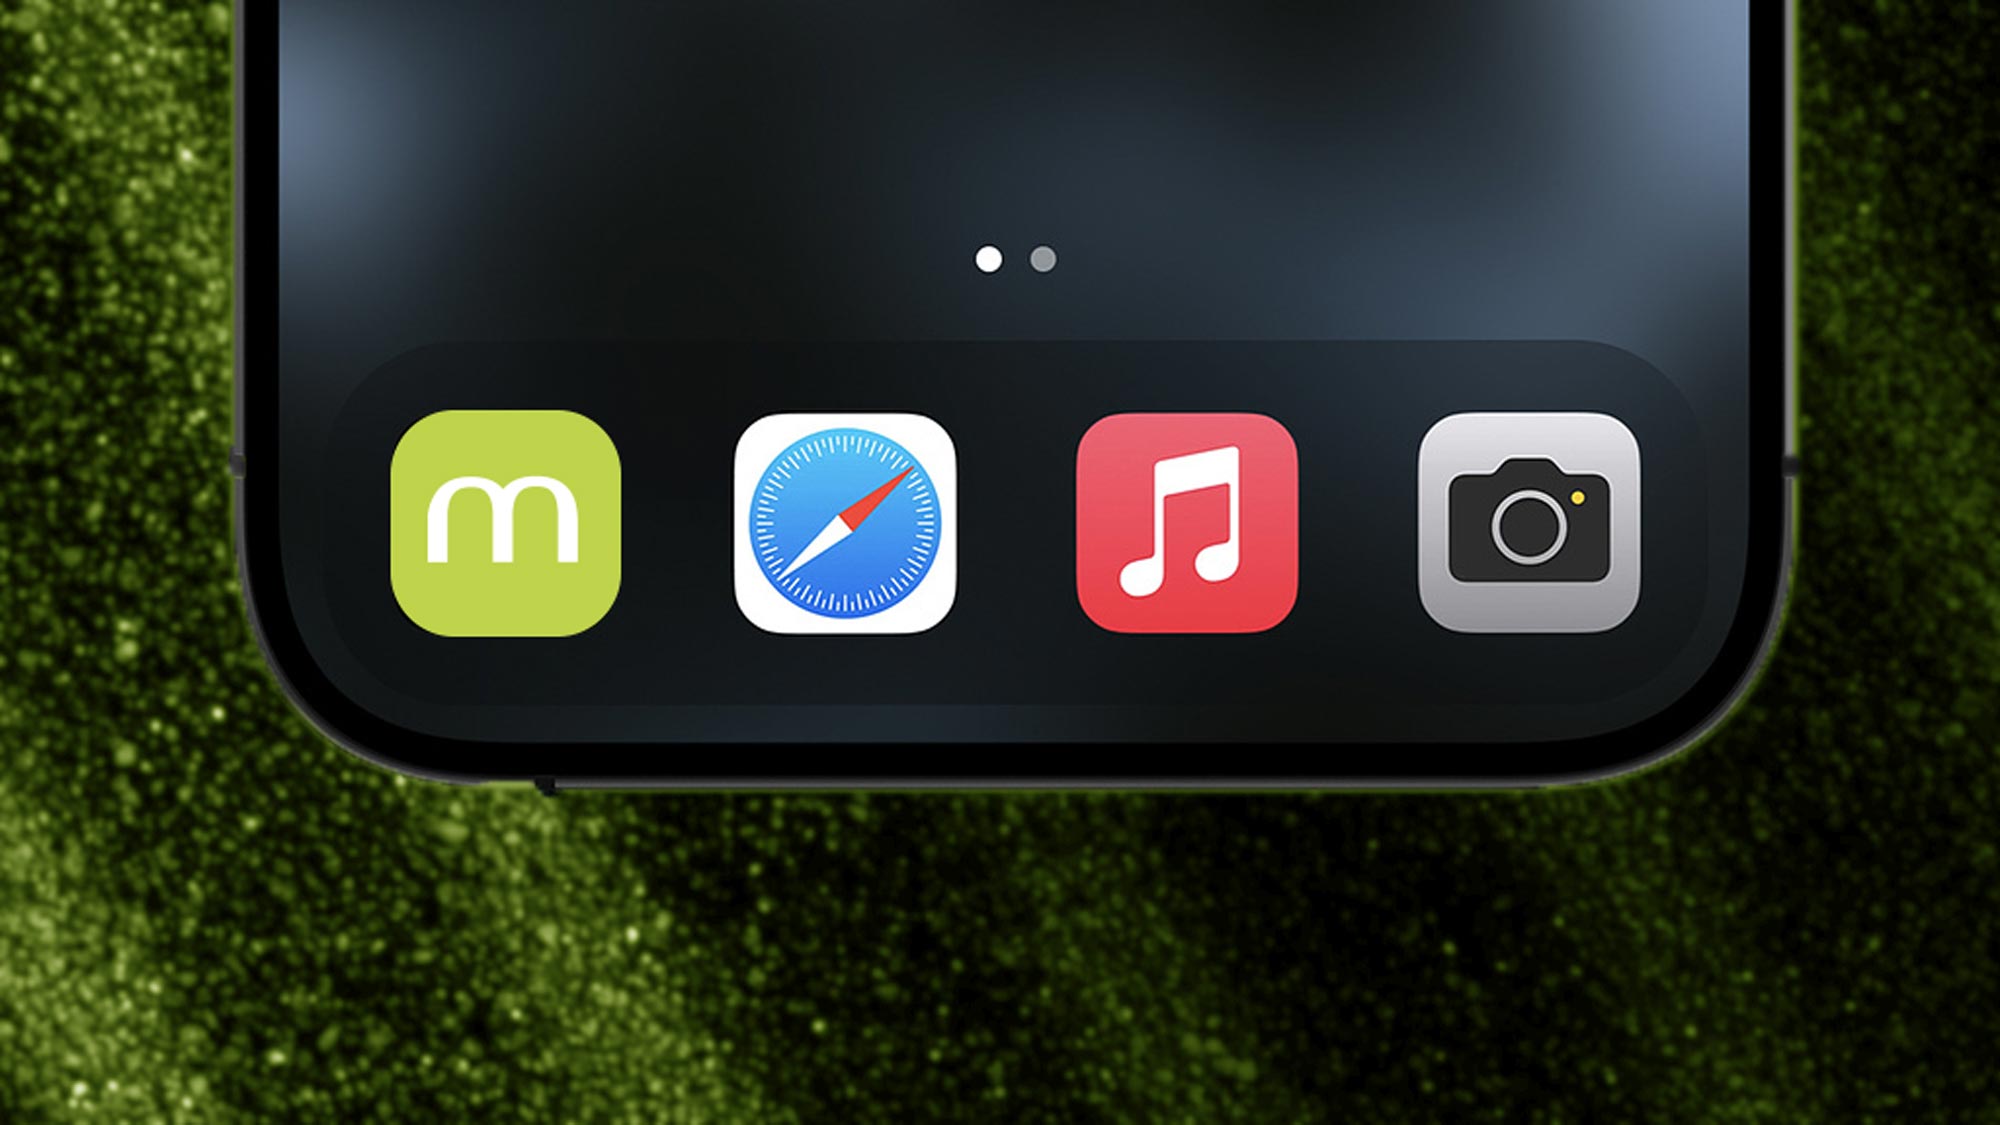 A IOS mobile screen featuring 4 apps in the dock.